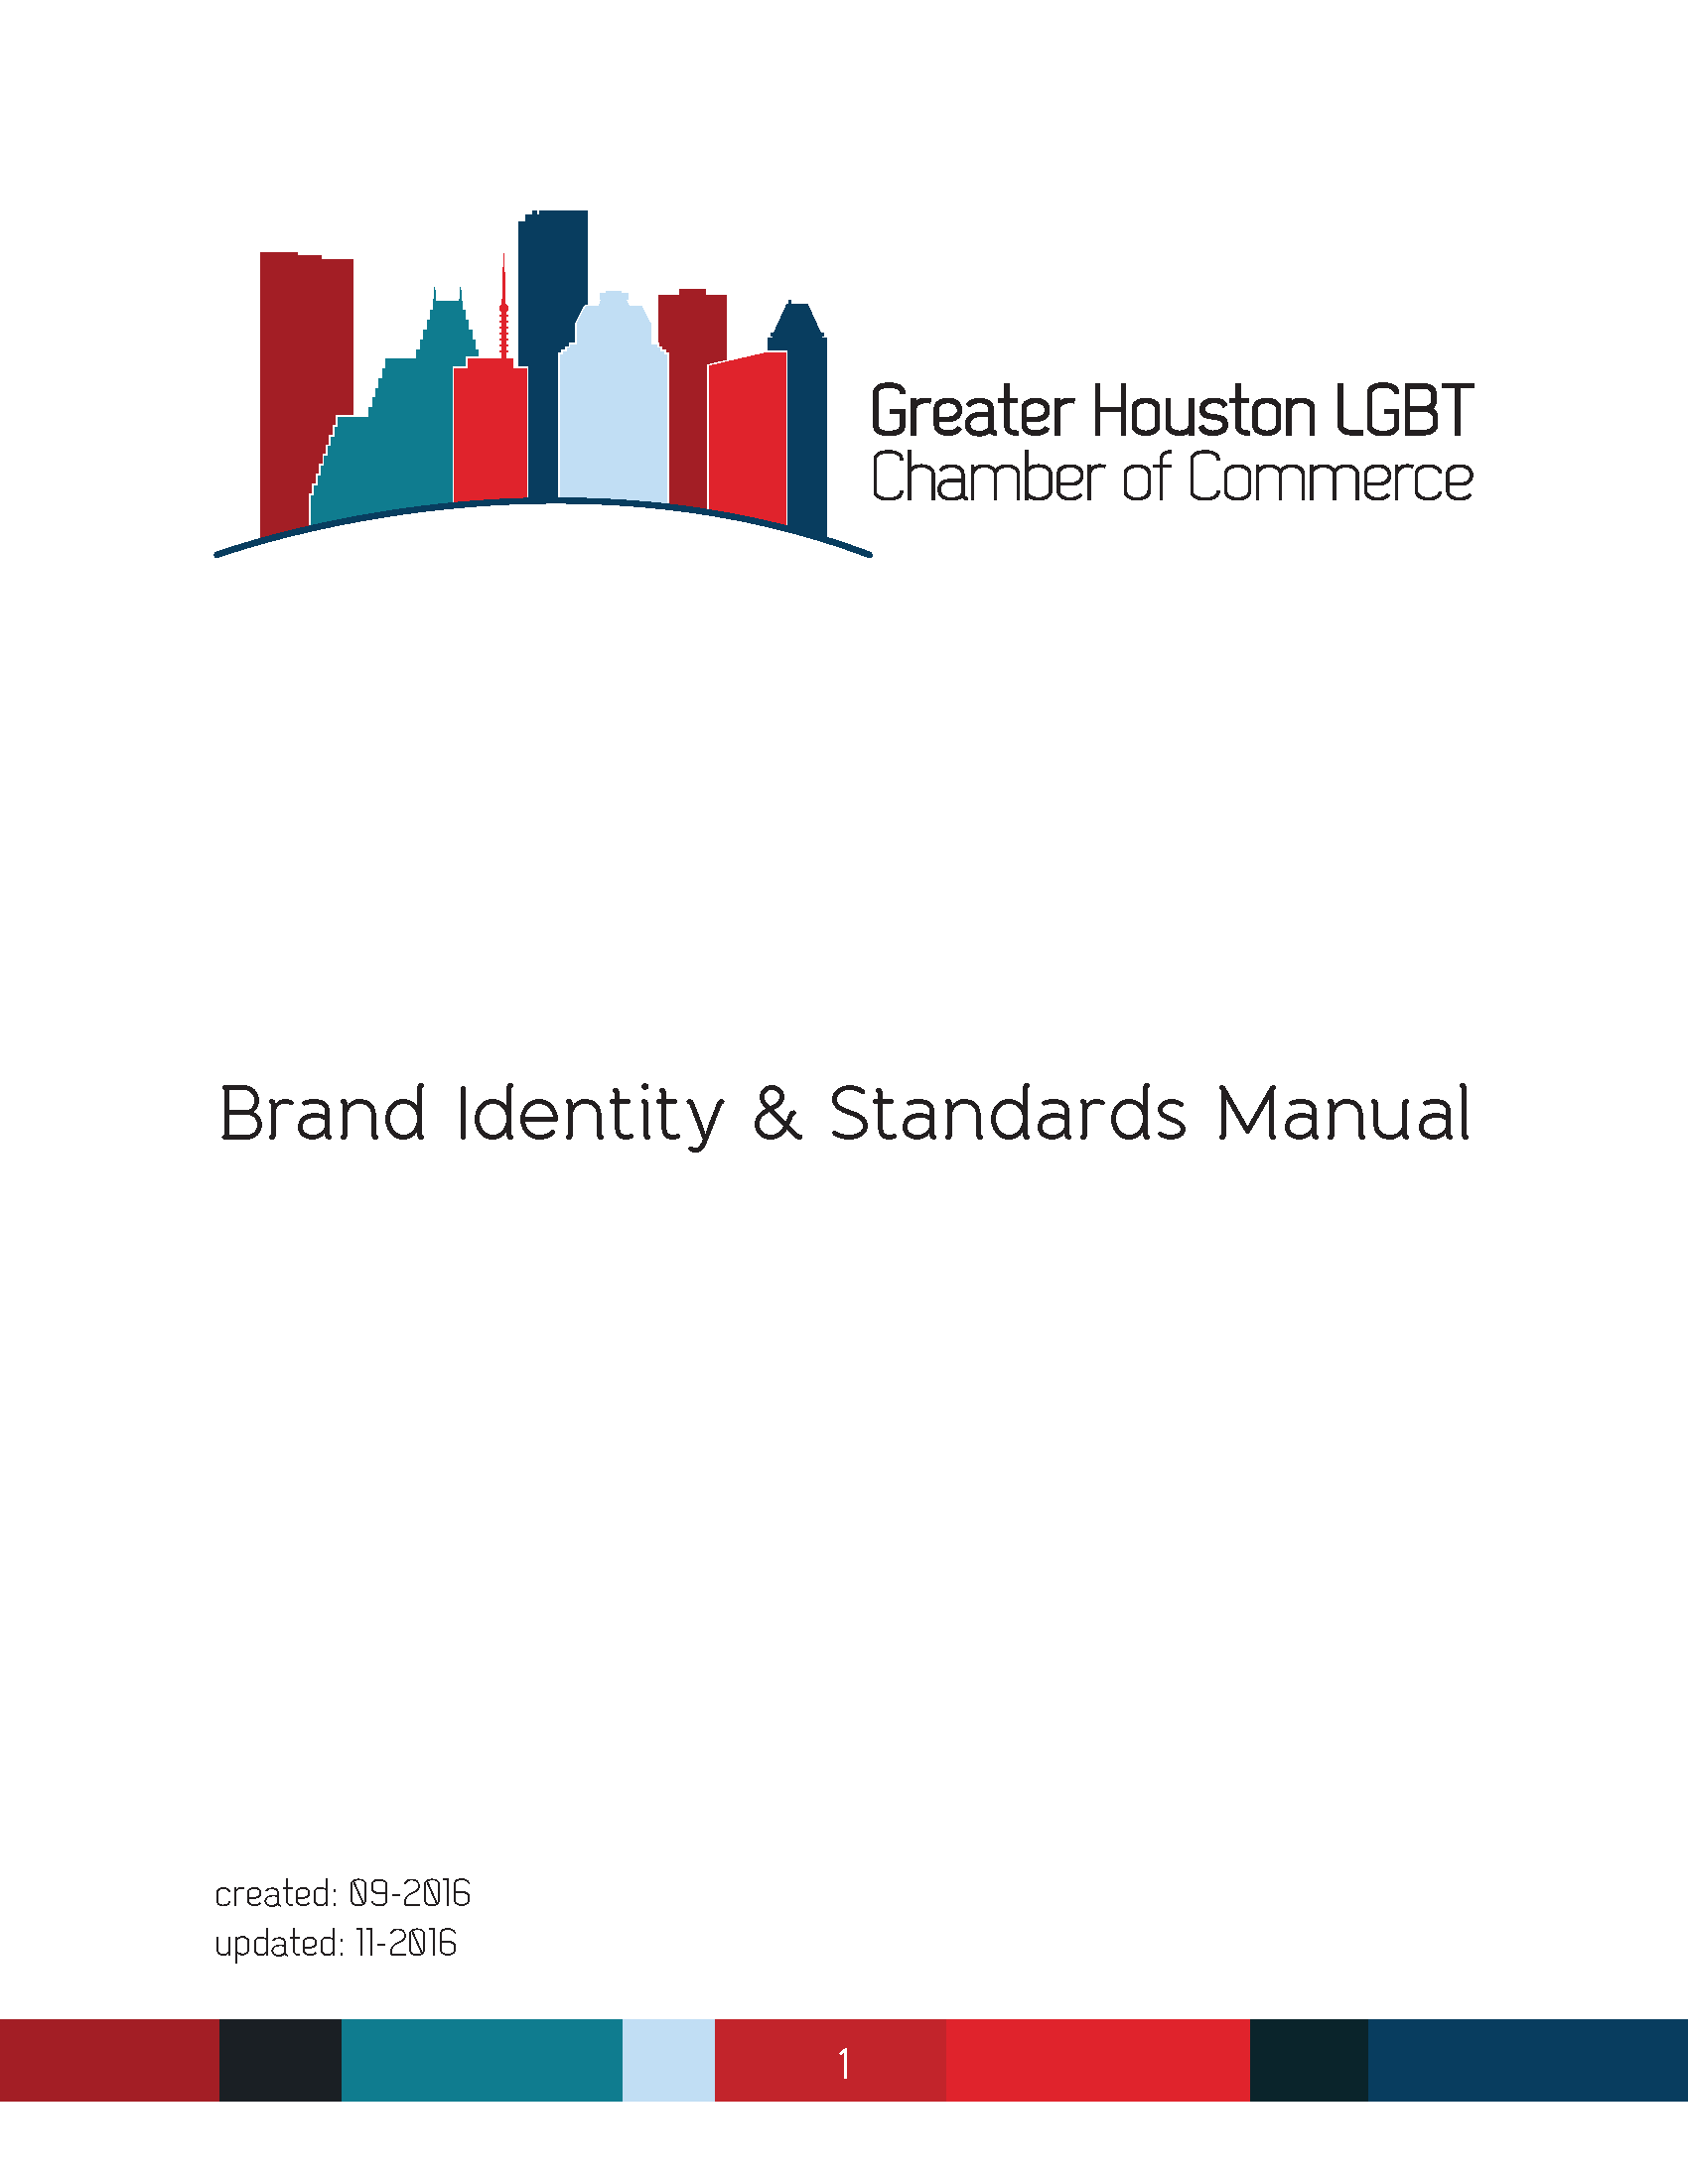 Pages from GH_LGBT_CoC_Brand_Guide